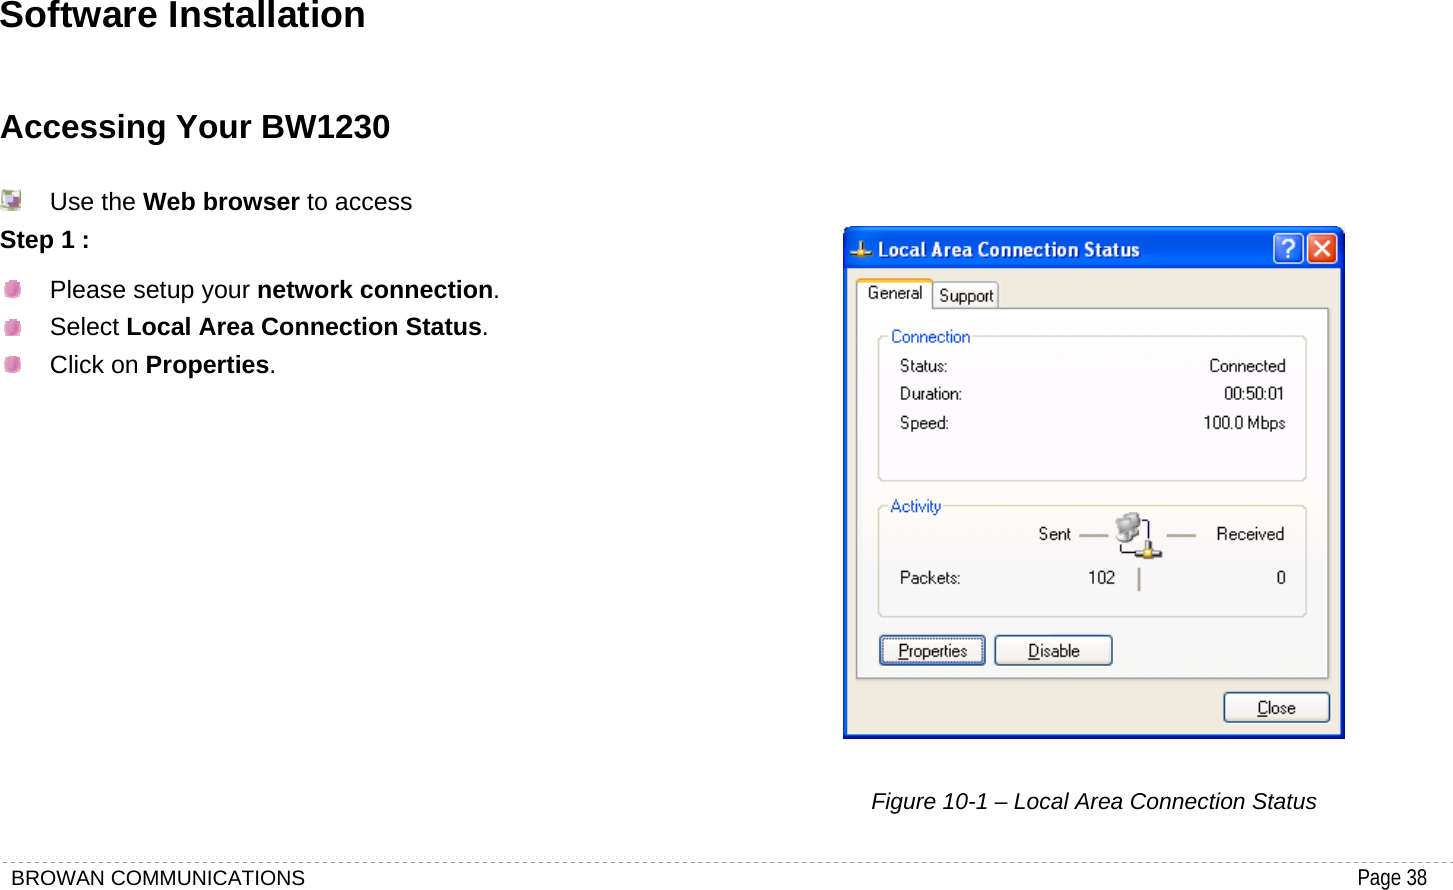 BROWAN COMMUNICATIONS                                                                                           Page 38  Software Installation Accessing Your BW1230  Use the Web browser to access Step 1 :   Please setup your network connection.  Select Local Area Connection Status.  Click on Properties.              Figure 10-1 – Local Area Connection Status 